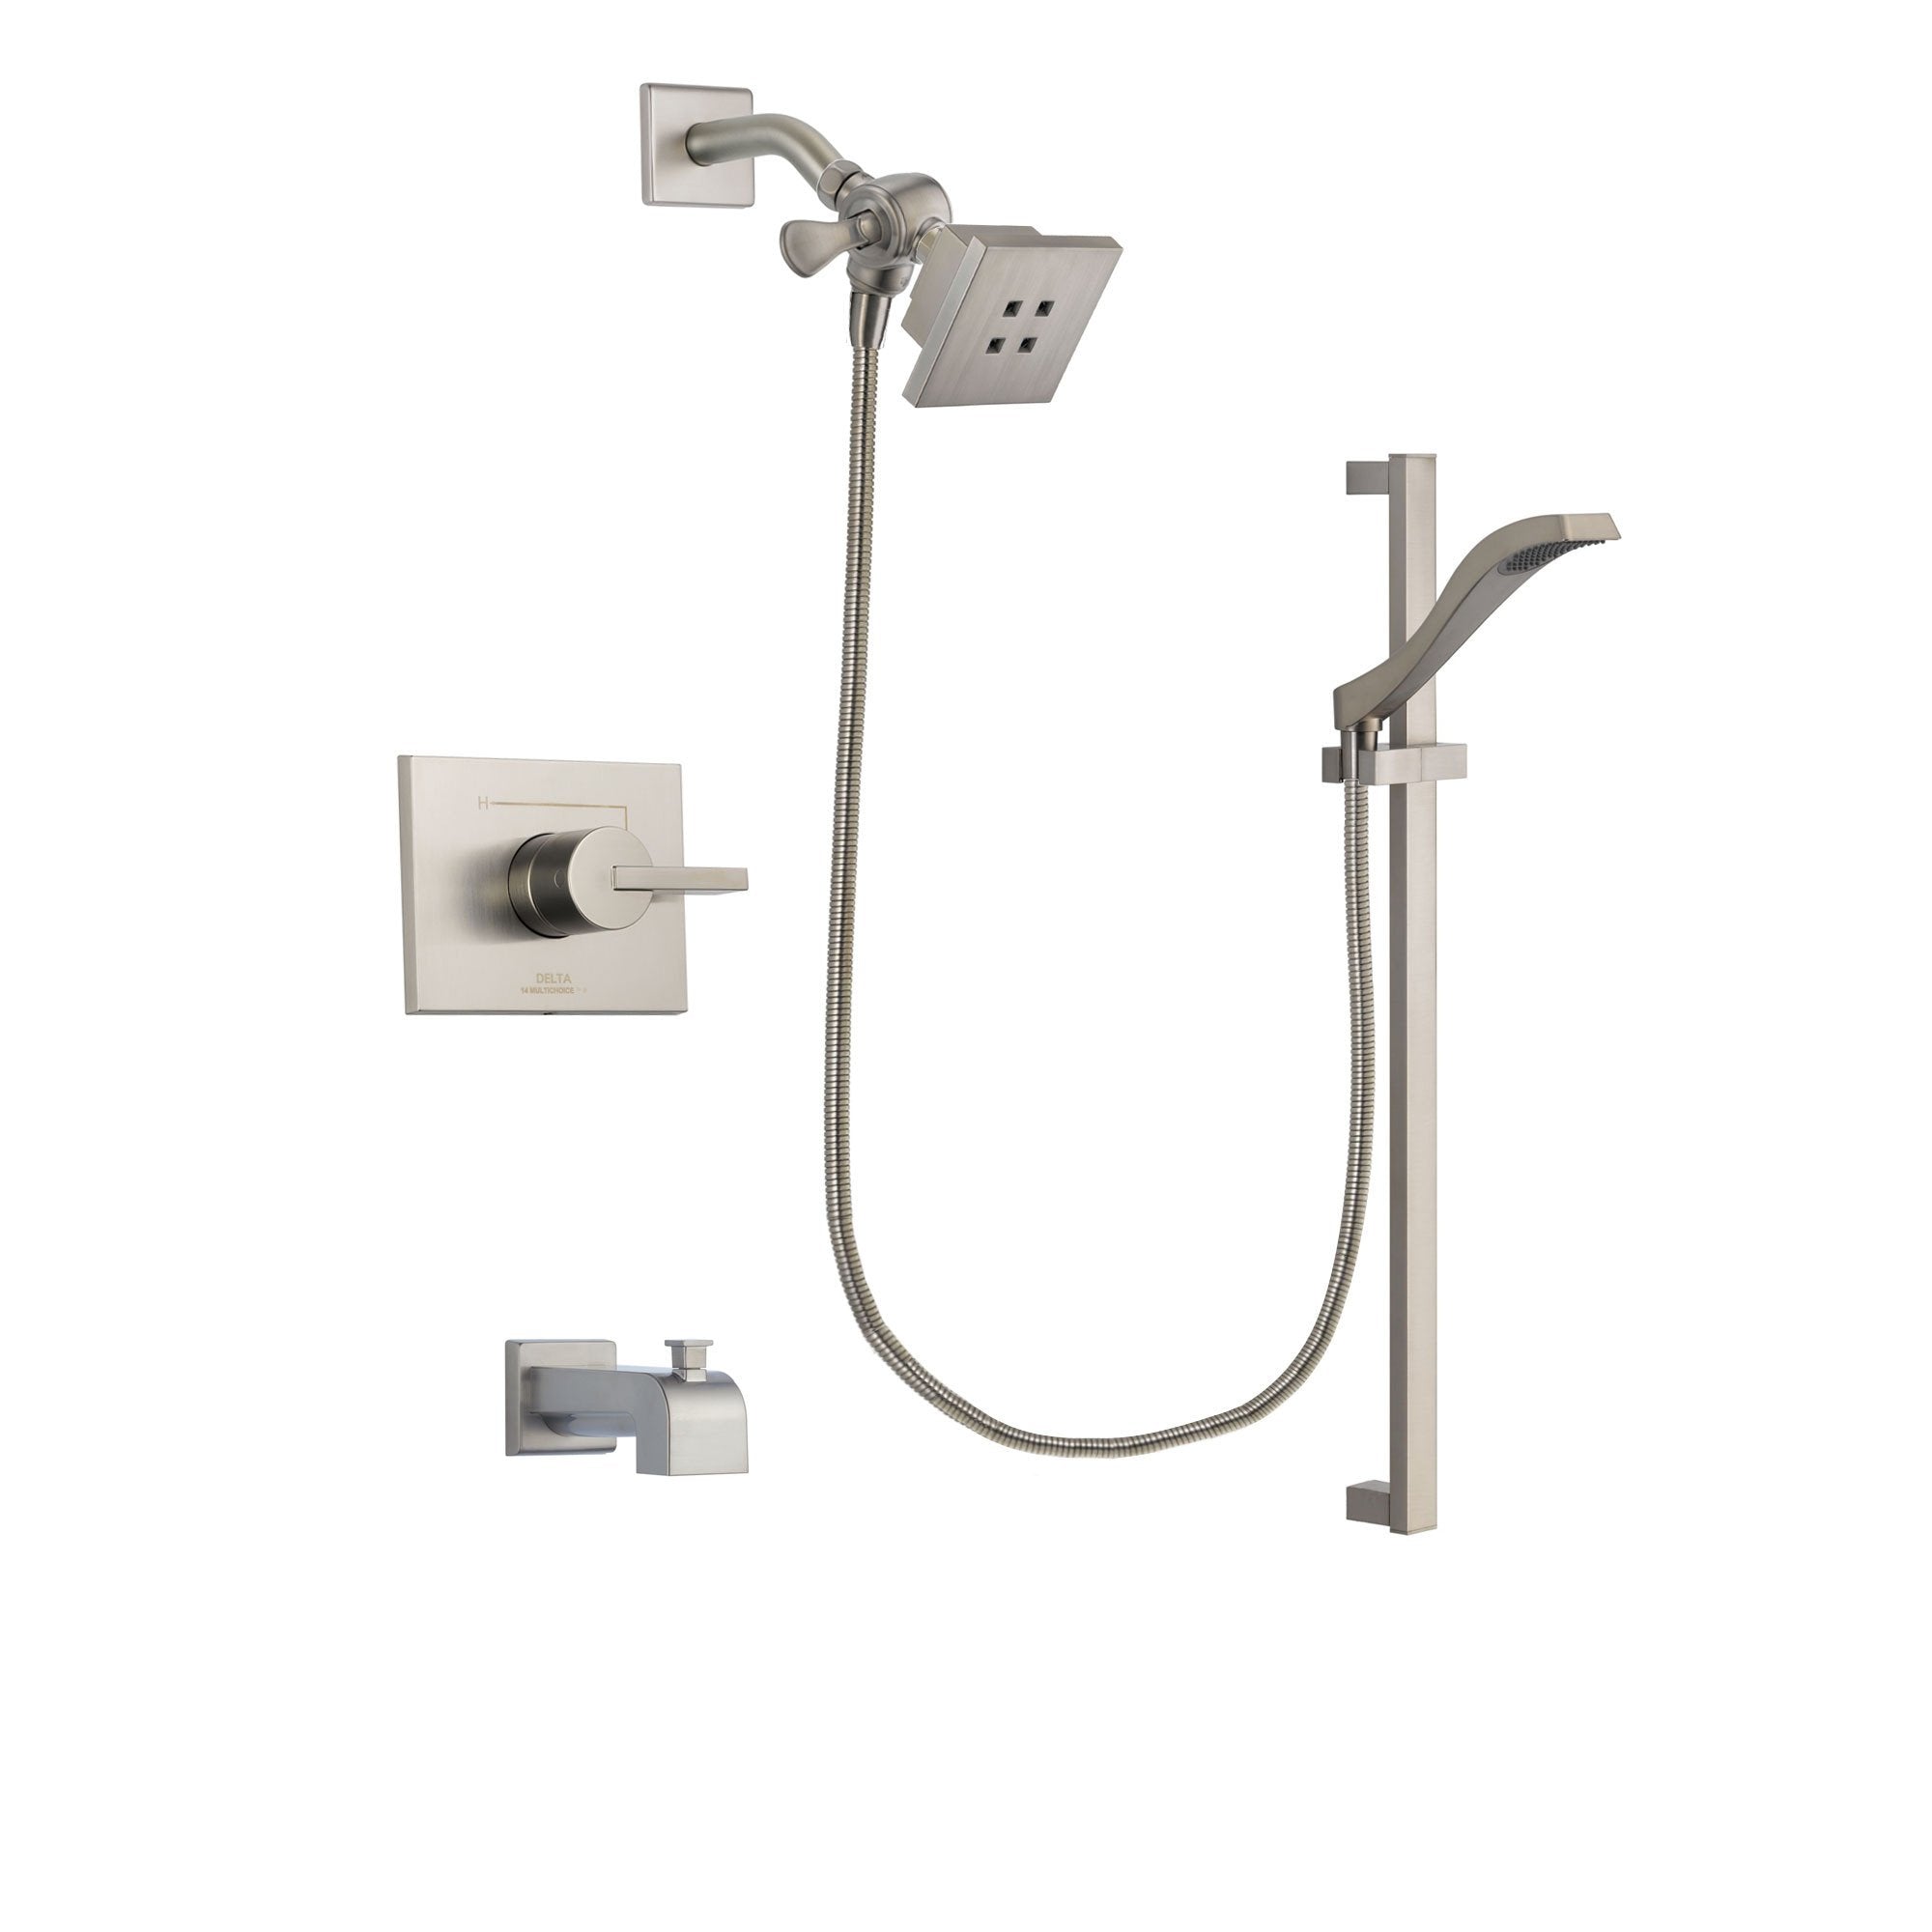 Delta Vero Stainless Steel Finish Tub and Shower Faucet System Package with Square Showerhead and Handheld Shower with Slide Bar Includes Rough-in Valve and Tub Spout DSP2227V